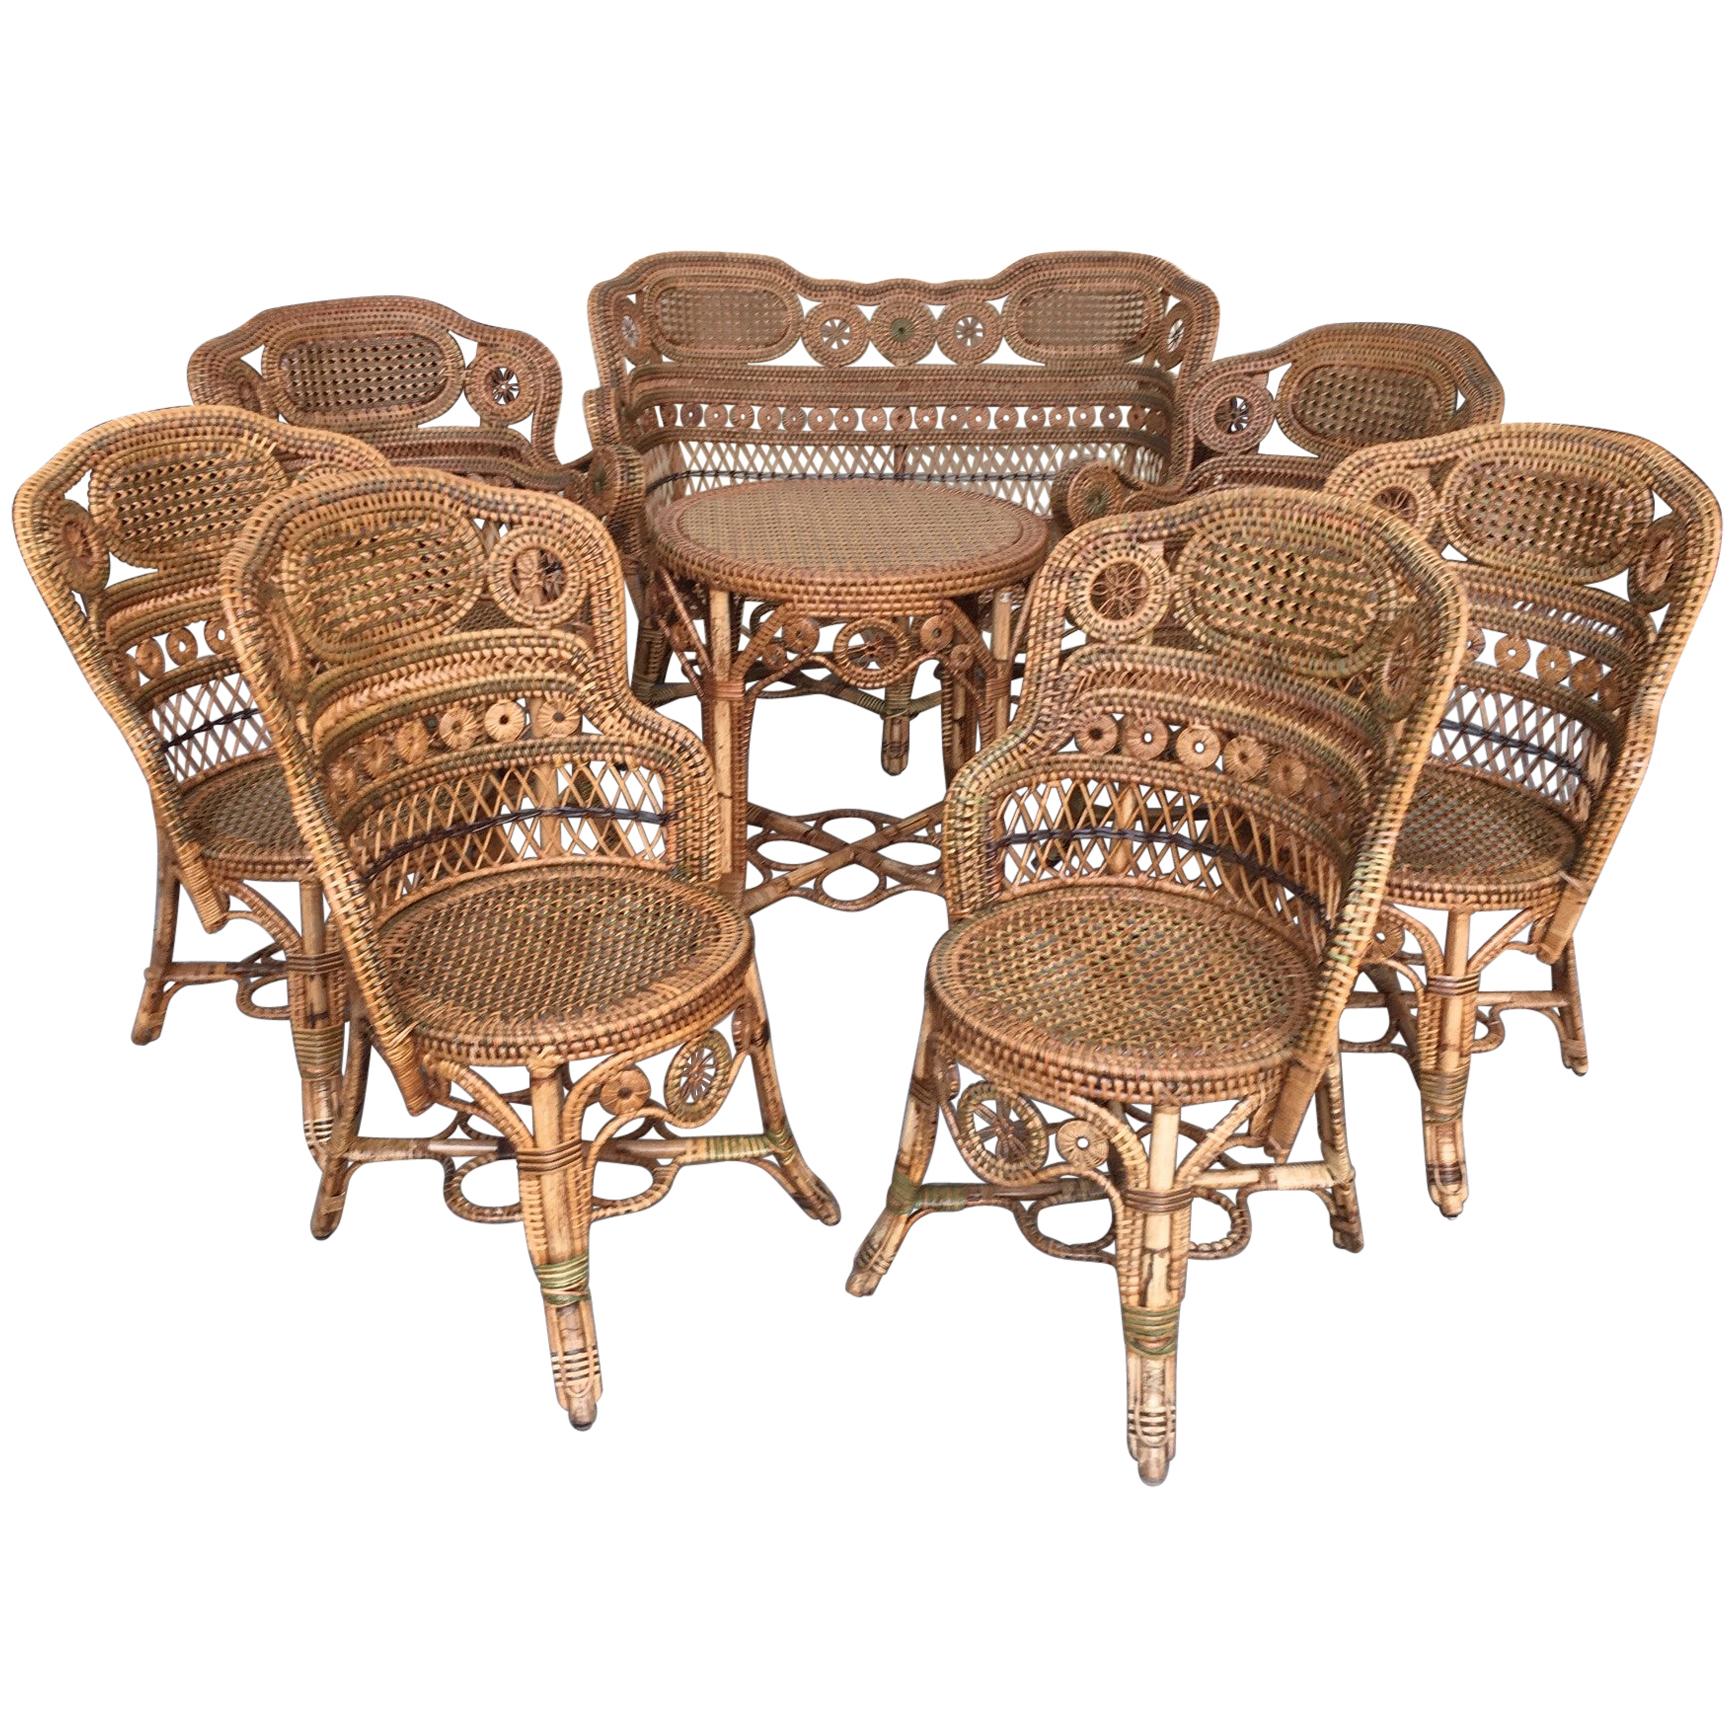 Rattan Garden Furniture Set by Maison Perret Vibert, Second Half of 19th Century For Sale